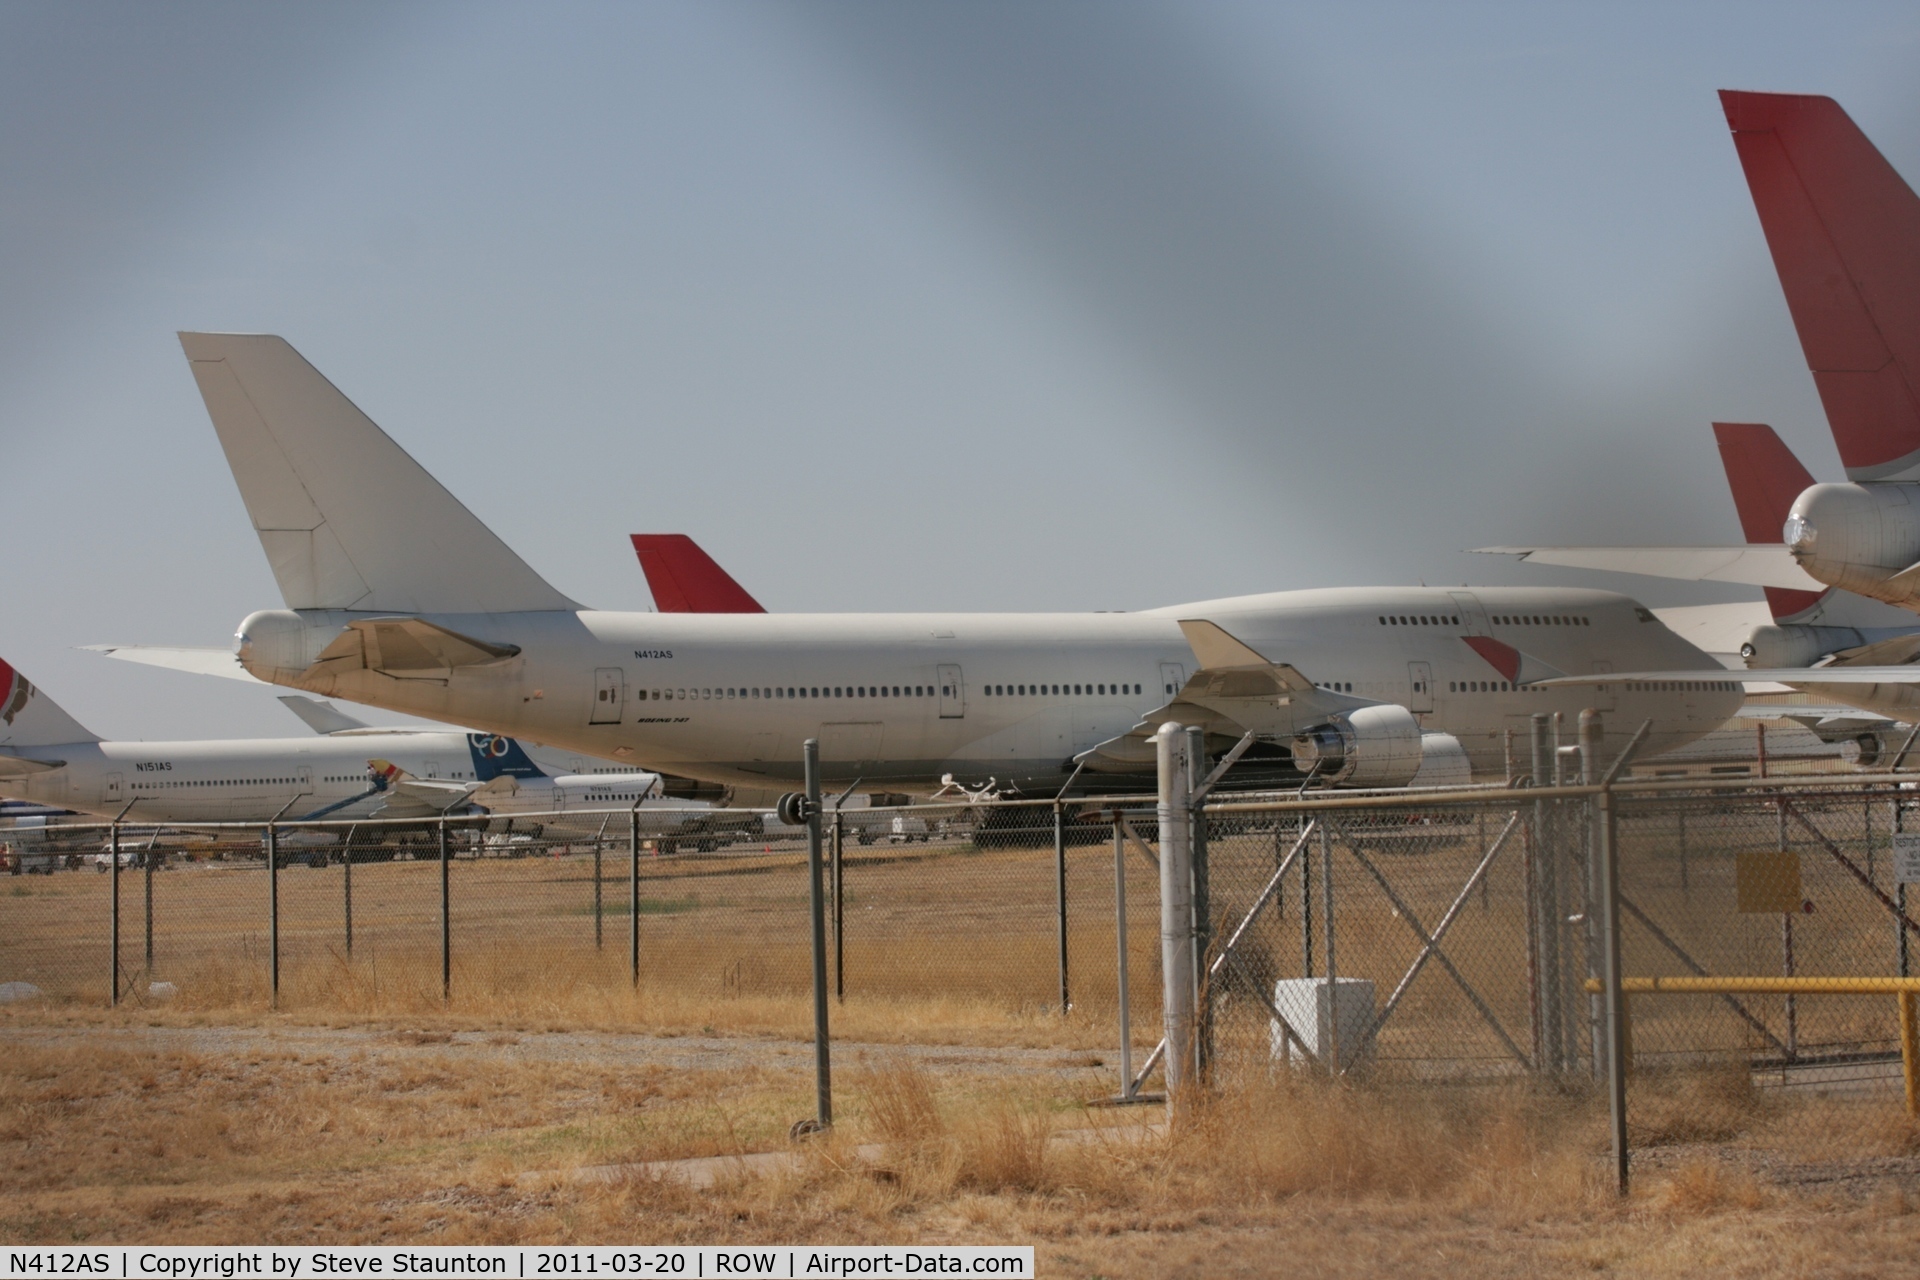 N412AS, 1990 Boeing 747-446 C/N 24425, Taken at Roswell International Air Centre Storage Facility, New Mexico in March 2011 whilst on an Aeroprint Aviation tour